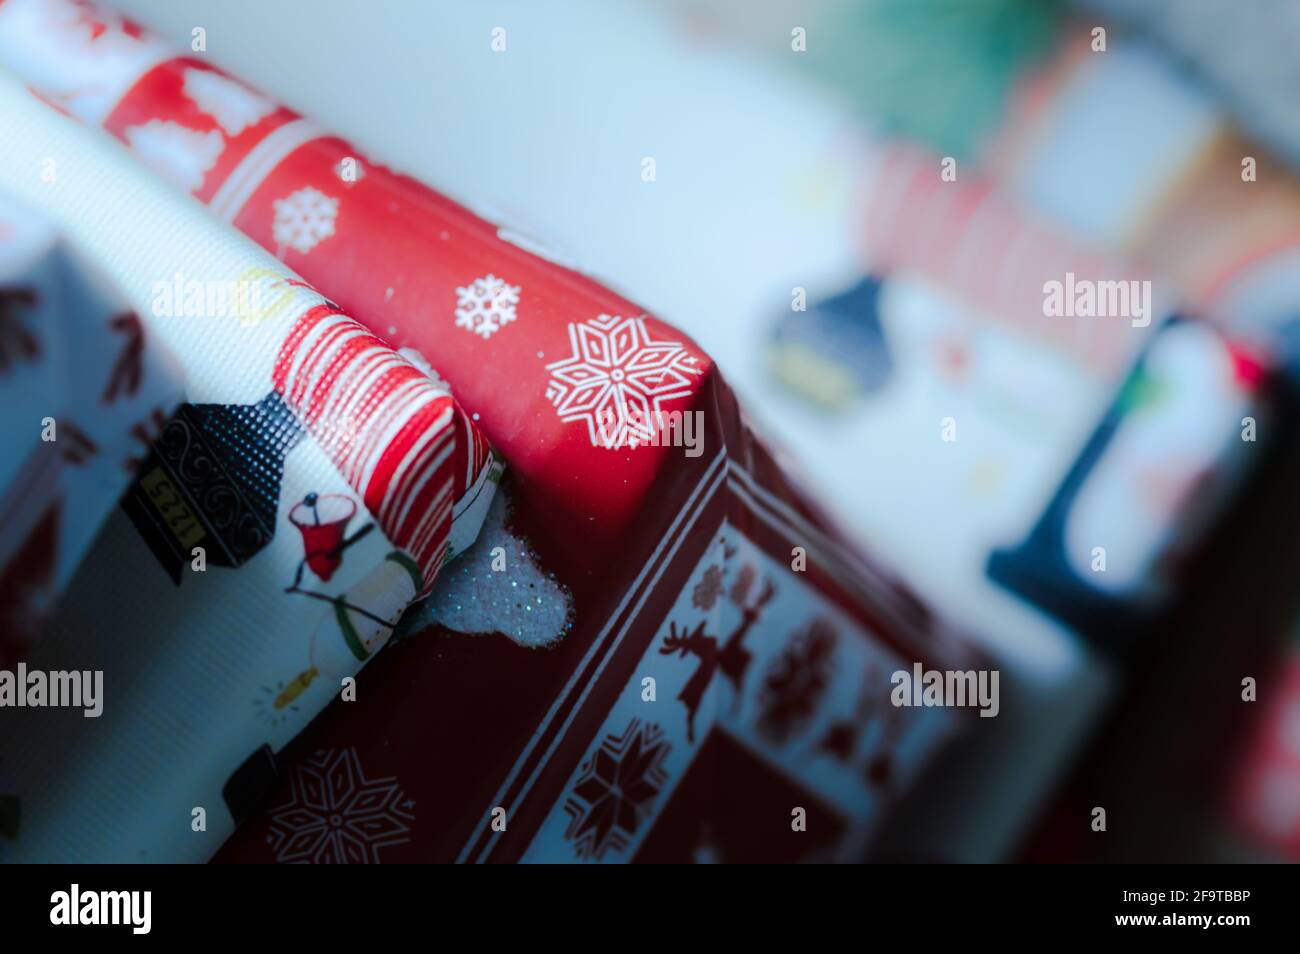 Corner of Wrapped Christmas Presents Stock Photo